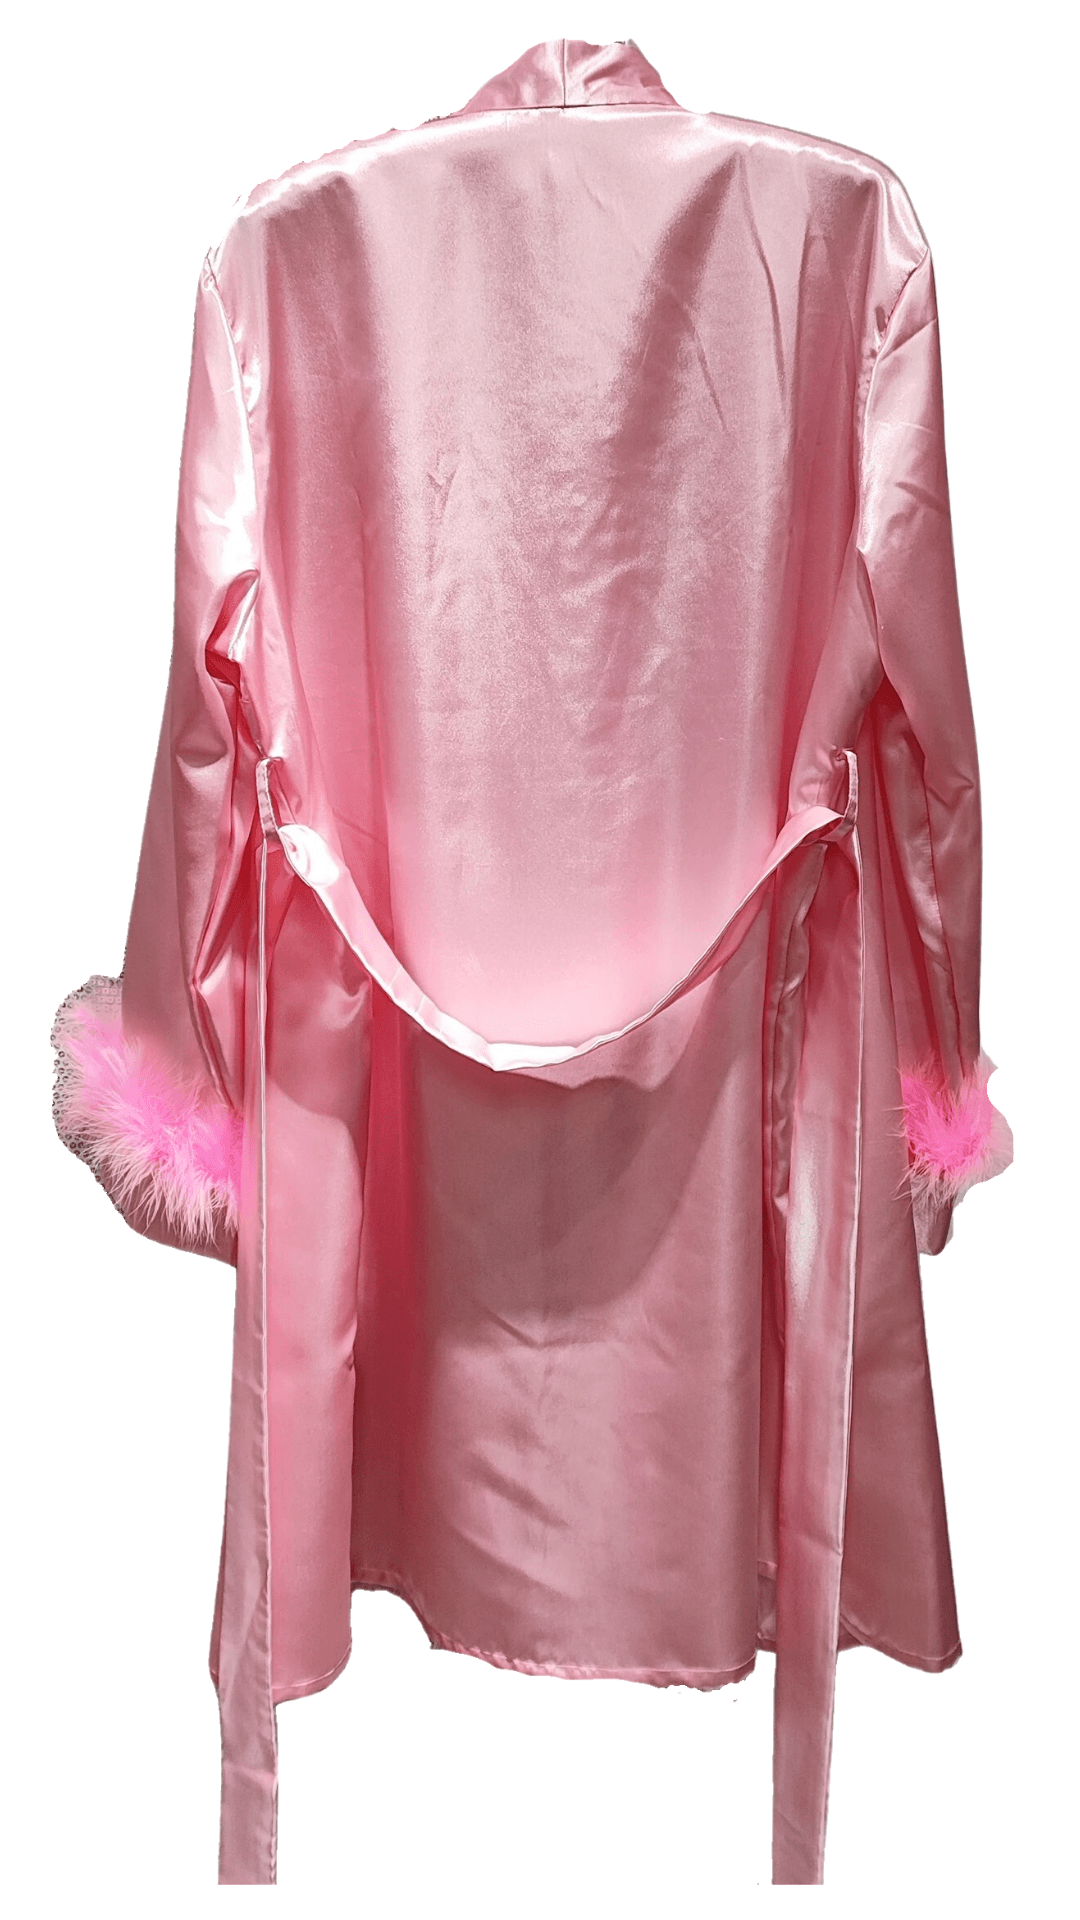 Pink Matching Custom Satin Robes for Dog Owners with Fur Trims - Pooch La La